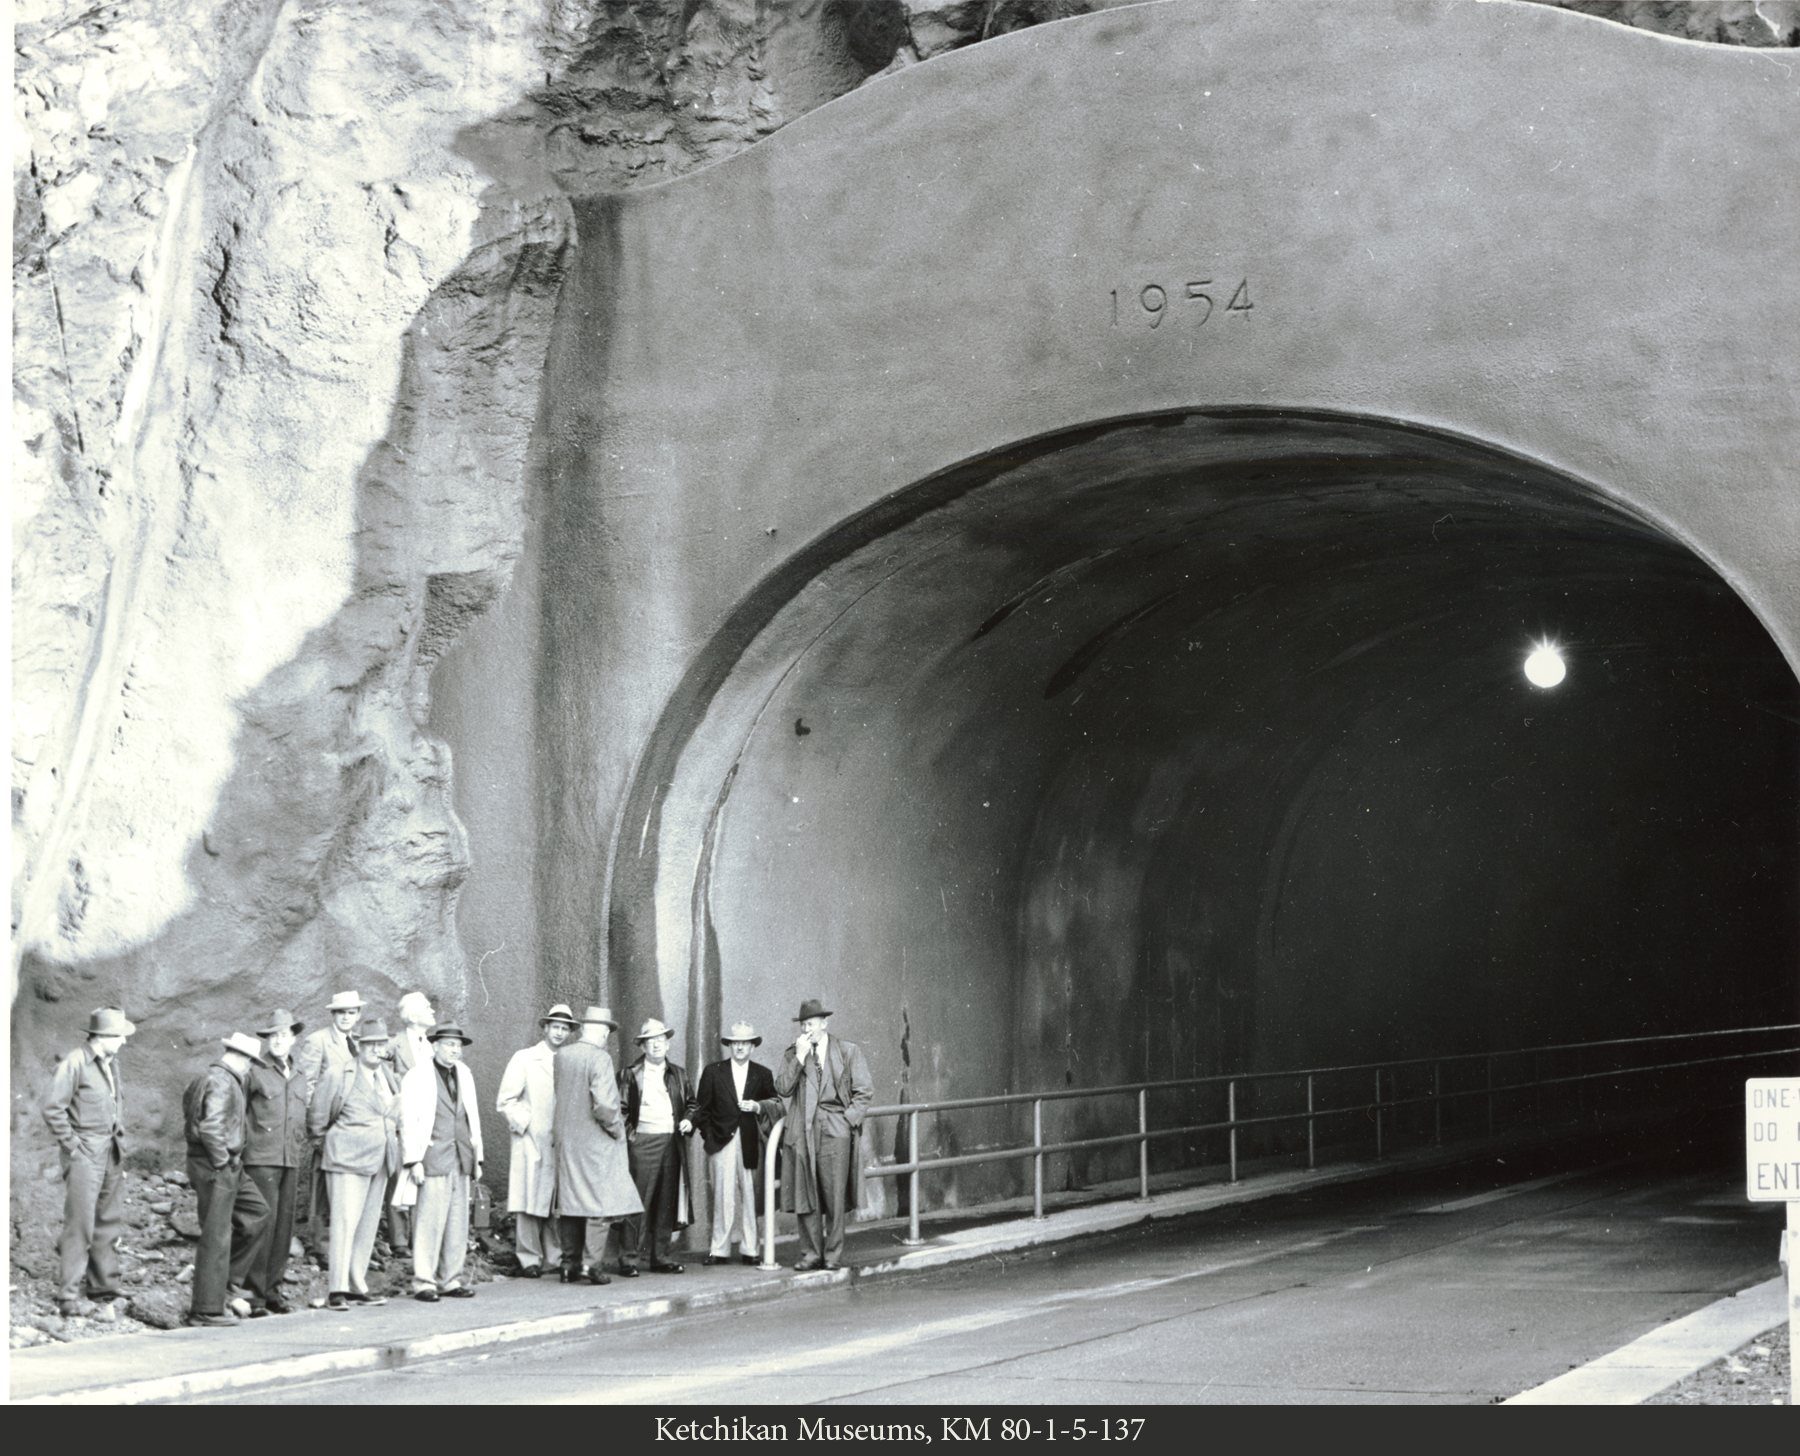 North portal the Ketchikan Tunnel at completion